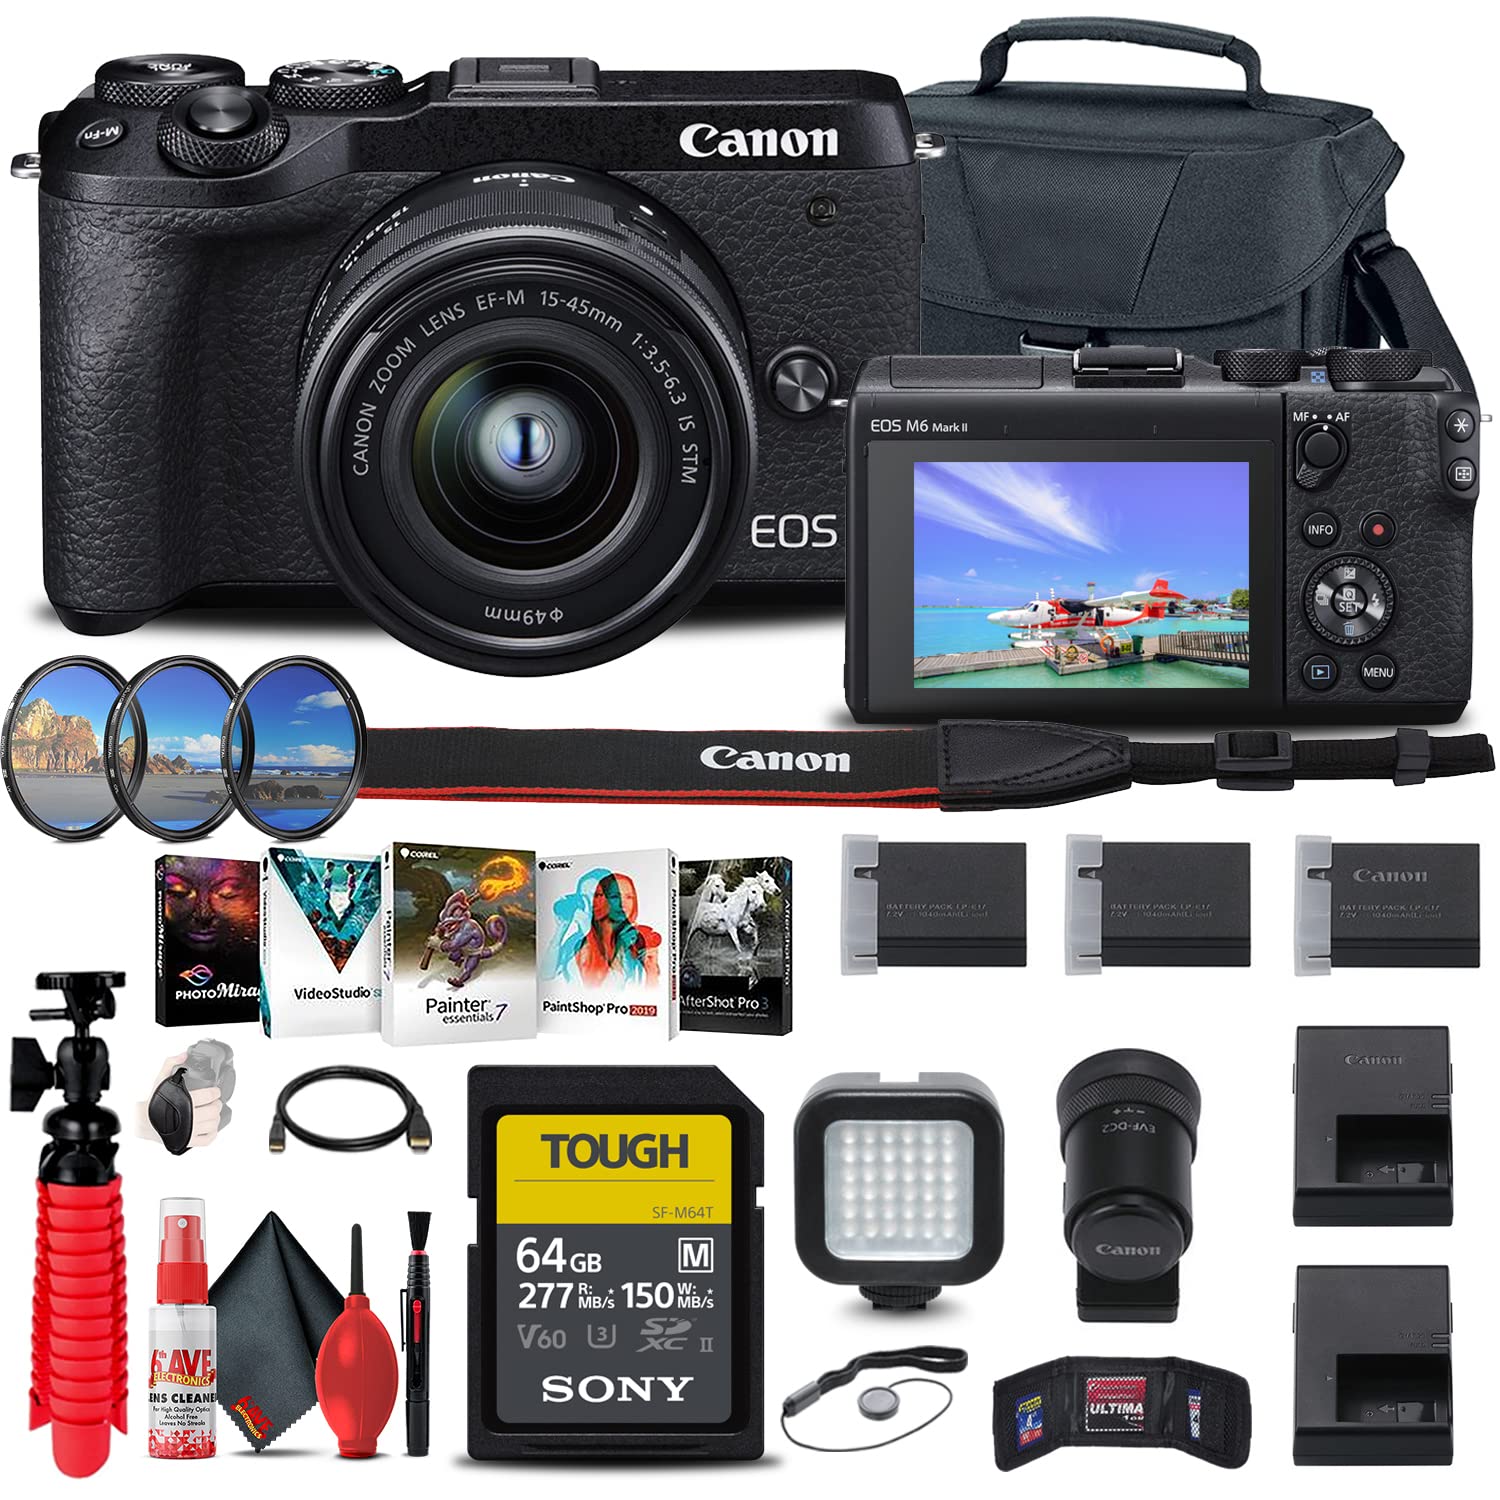 Canon EOS M6 Mark II Mirrorless Digital Camera with 15-45mm Lens and EVF-DC2 Viewfinder (Black) (3611C011) + 64GB Tough Card + Case + Filter Kit + ...